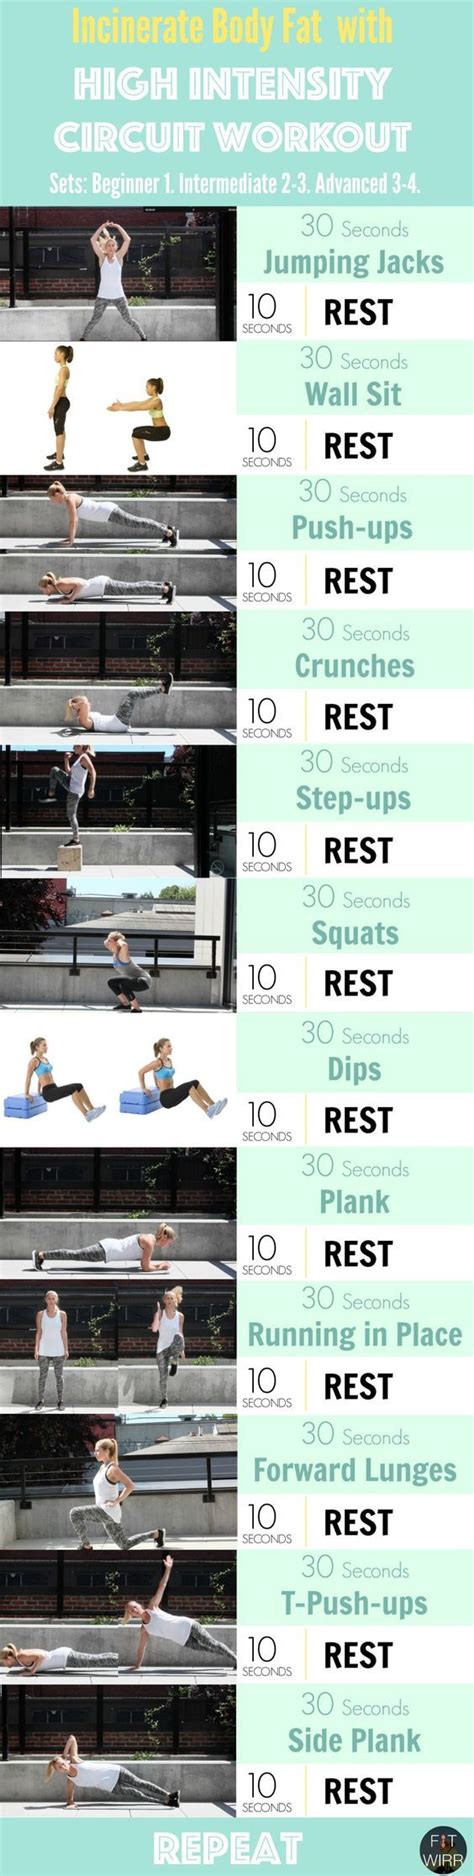 High Intensity Circuit Workout Pictures Photos And Images For